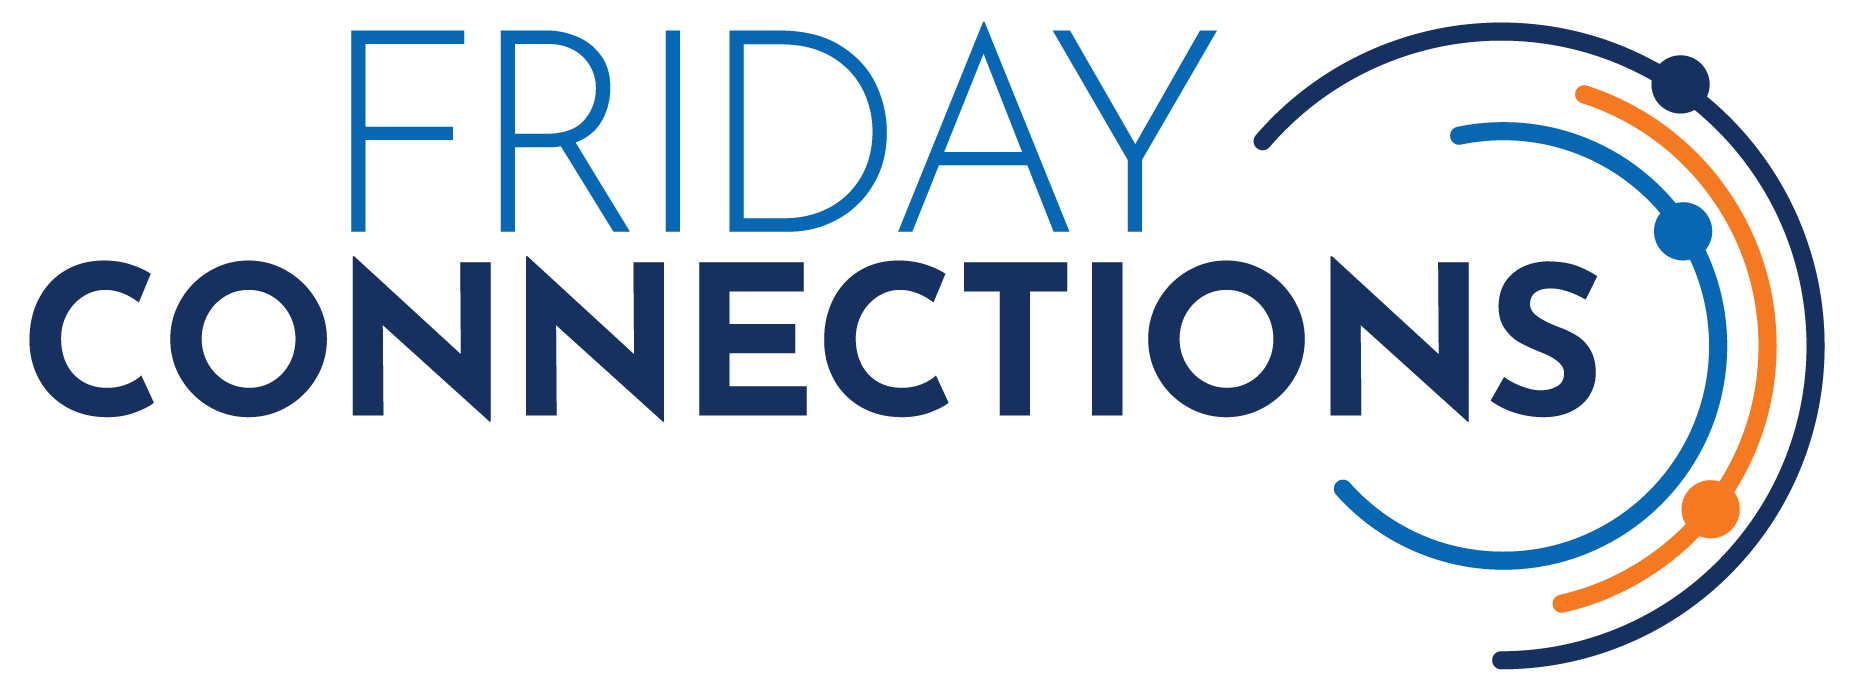 friday-connections-logo-only-0321